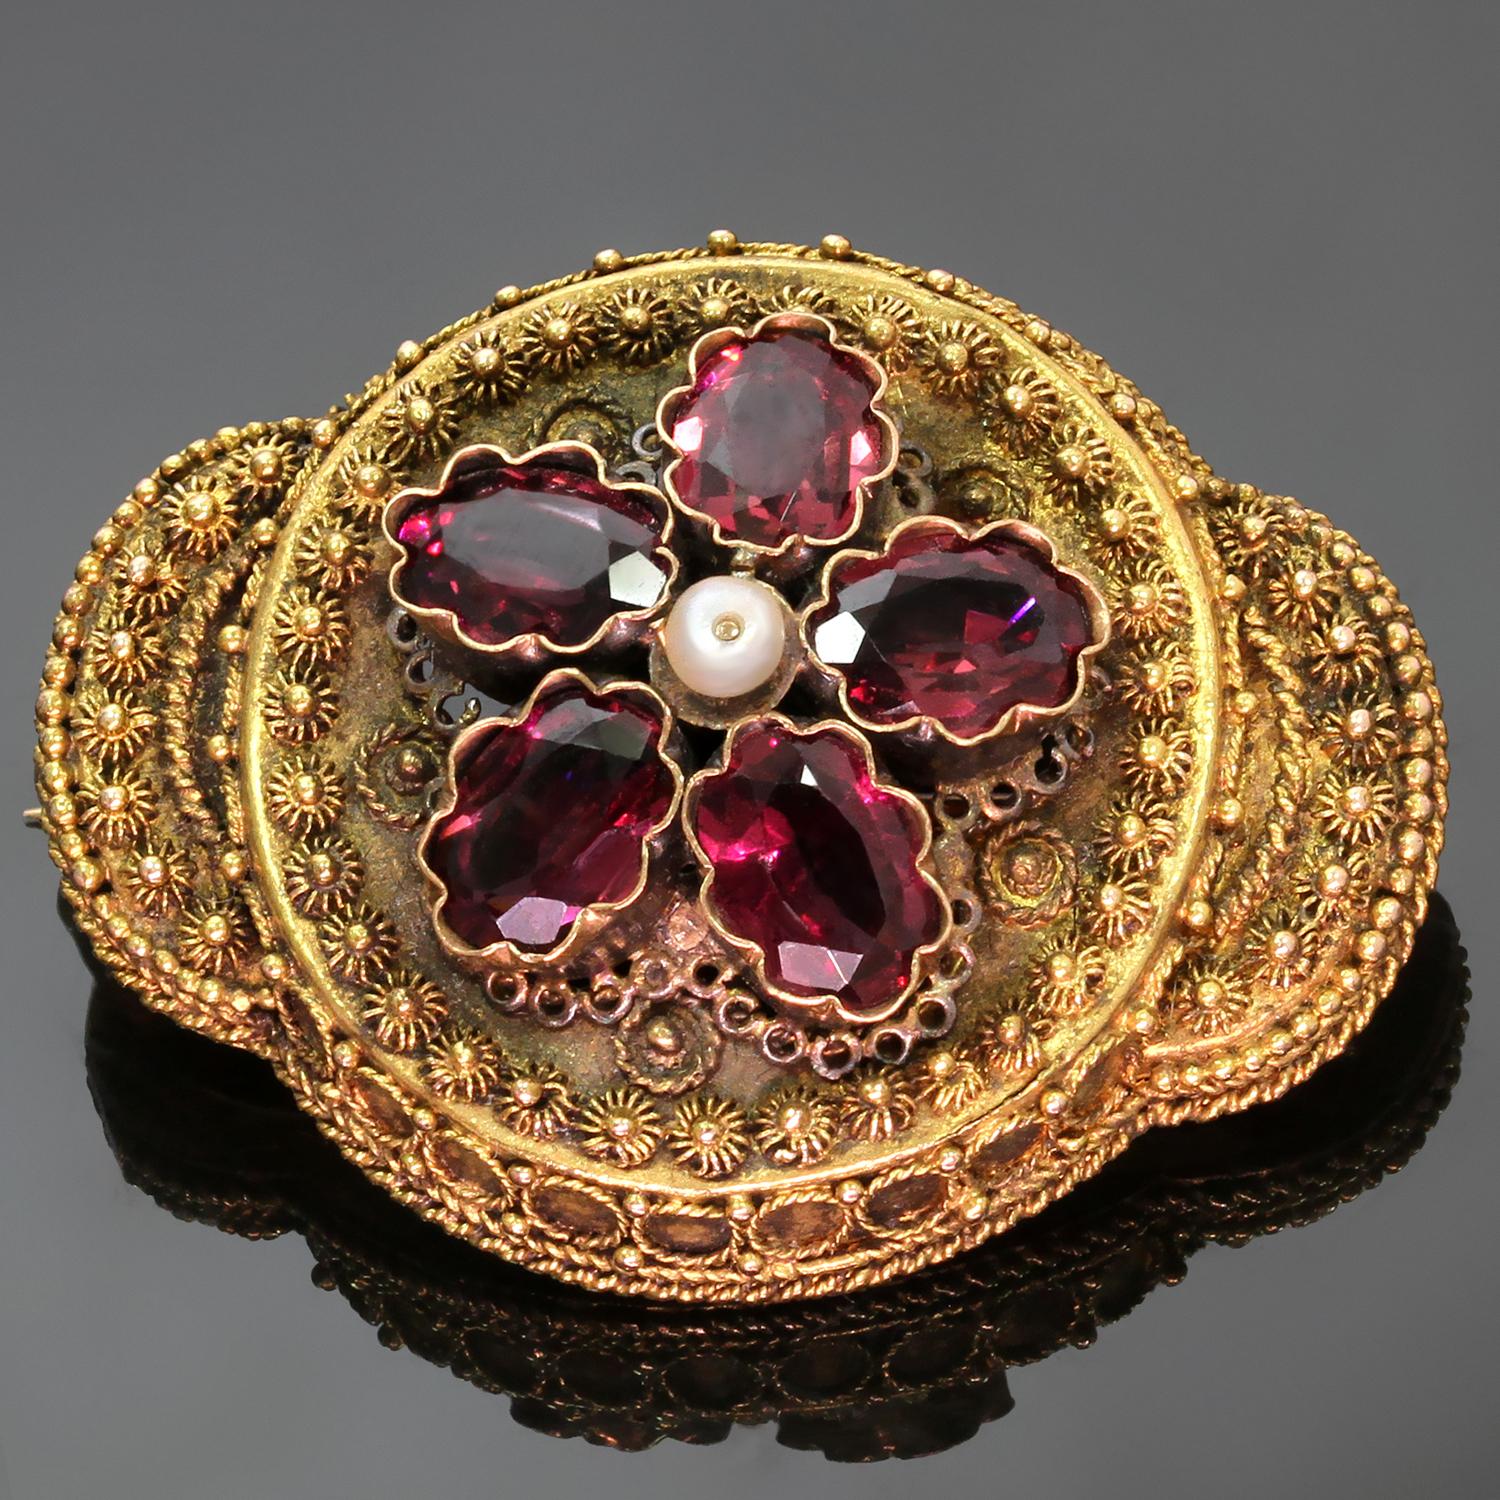 This rare antique Victorian brooch features an intricate filligree design hand-crafted in 15k yellow gold, set with faceted oval red rubillites, and completed with a saltwater natural pearl in the center. Brooch can also be worn as a pendant. Made